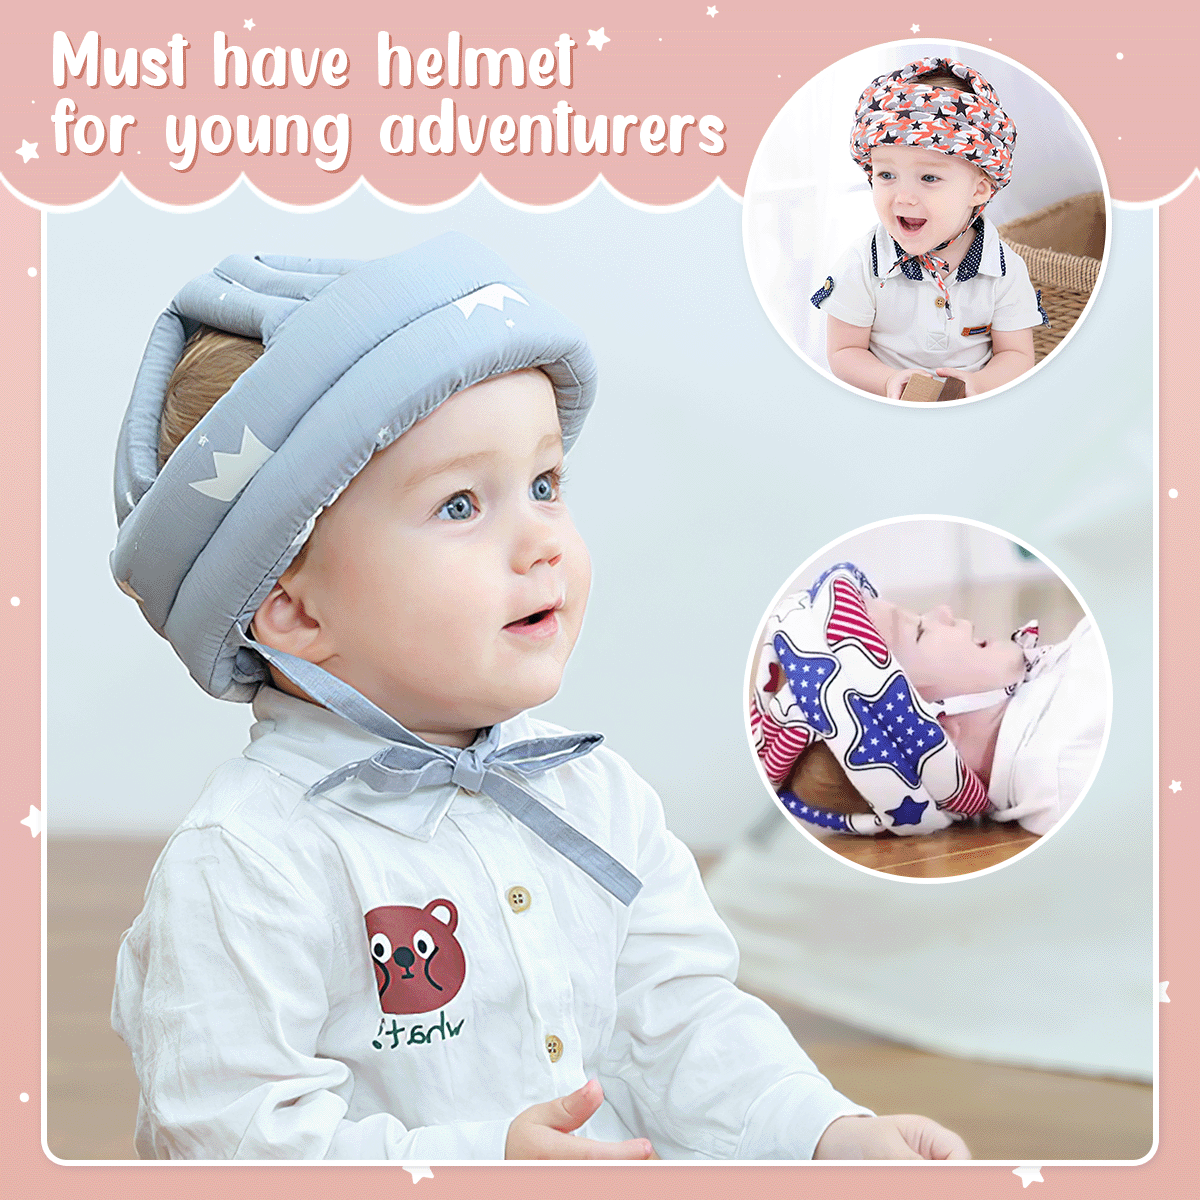 Baby Safety Helmet Head Protection Headgear Toddler Anti-fall Pad